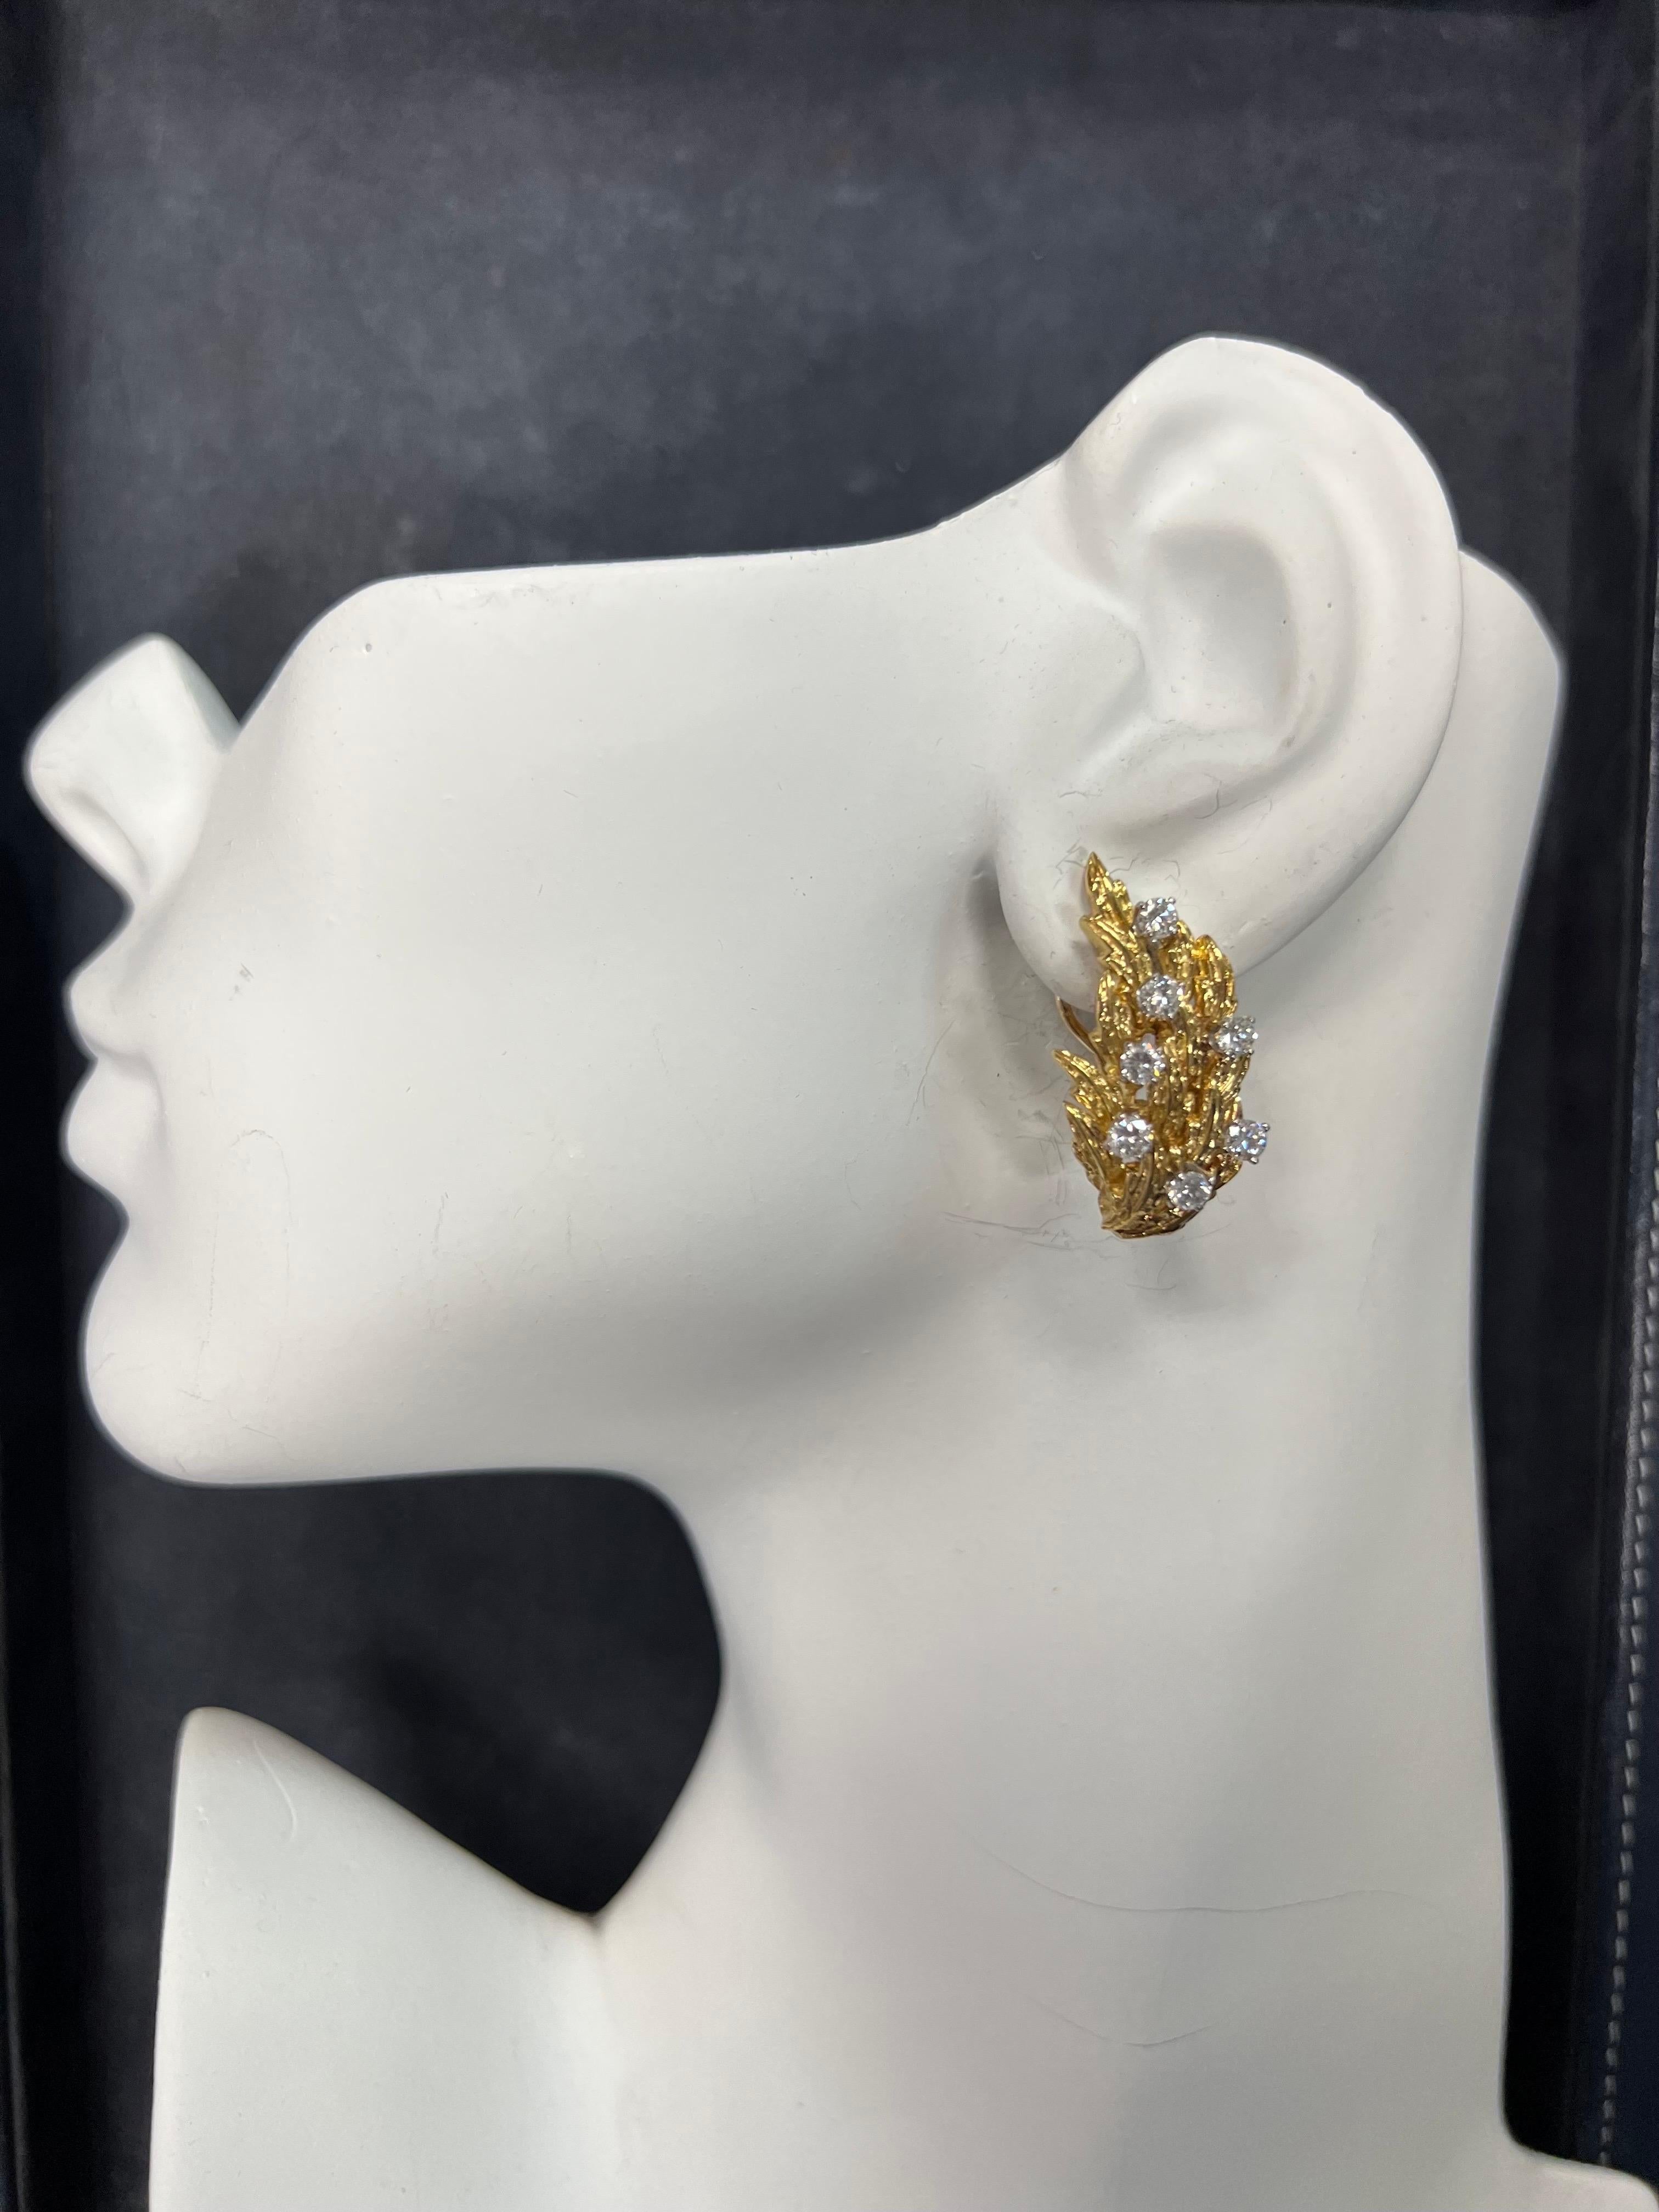 A magnificent 18K Yellow Gold,  Diamond Bracelet & Earring Set.

The Bracelet is set with 60 natural colorless round brilliant diamonds, approximately VS in clarity. The weight of the piece is 57.9 grams with a diamond weight of 4.50 carats. The